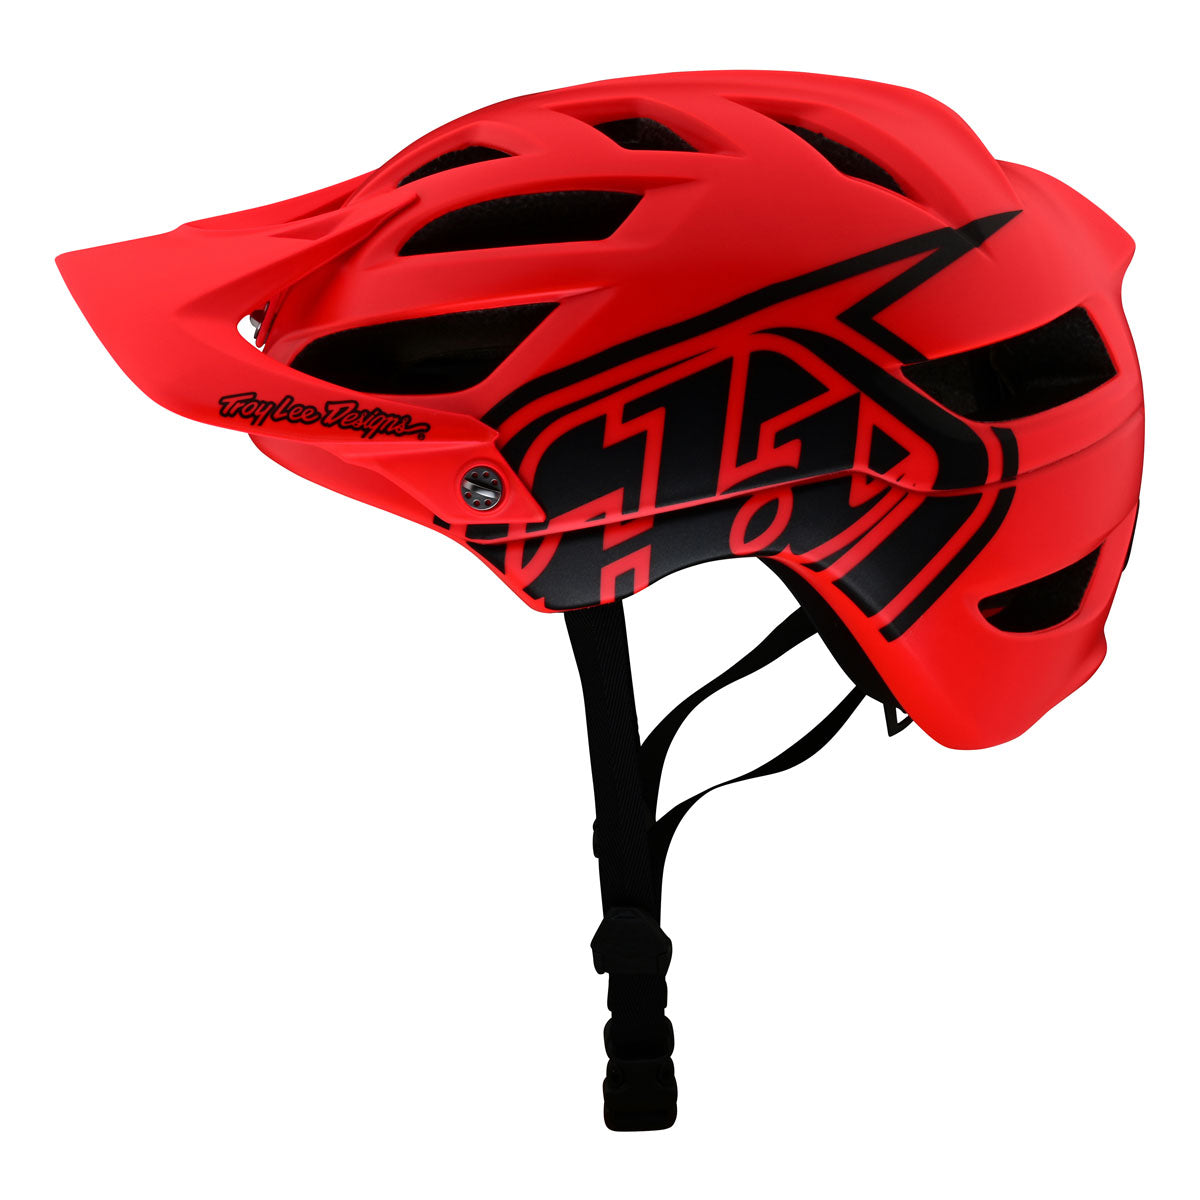 Troy Lee Designs A1 Helmet (CLOSEOUT) - Drone Fire Red